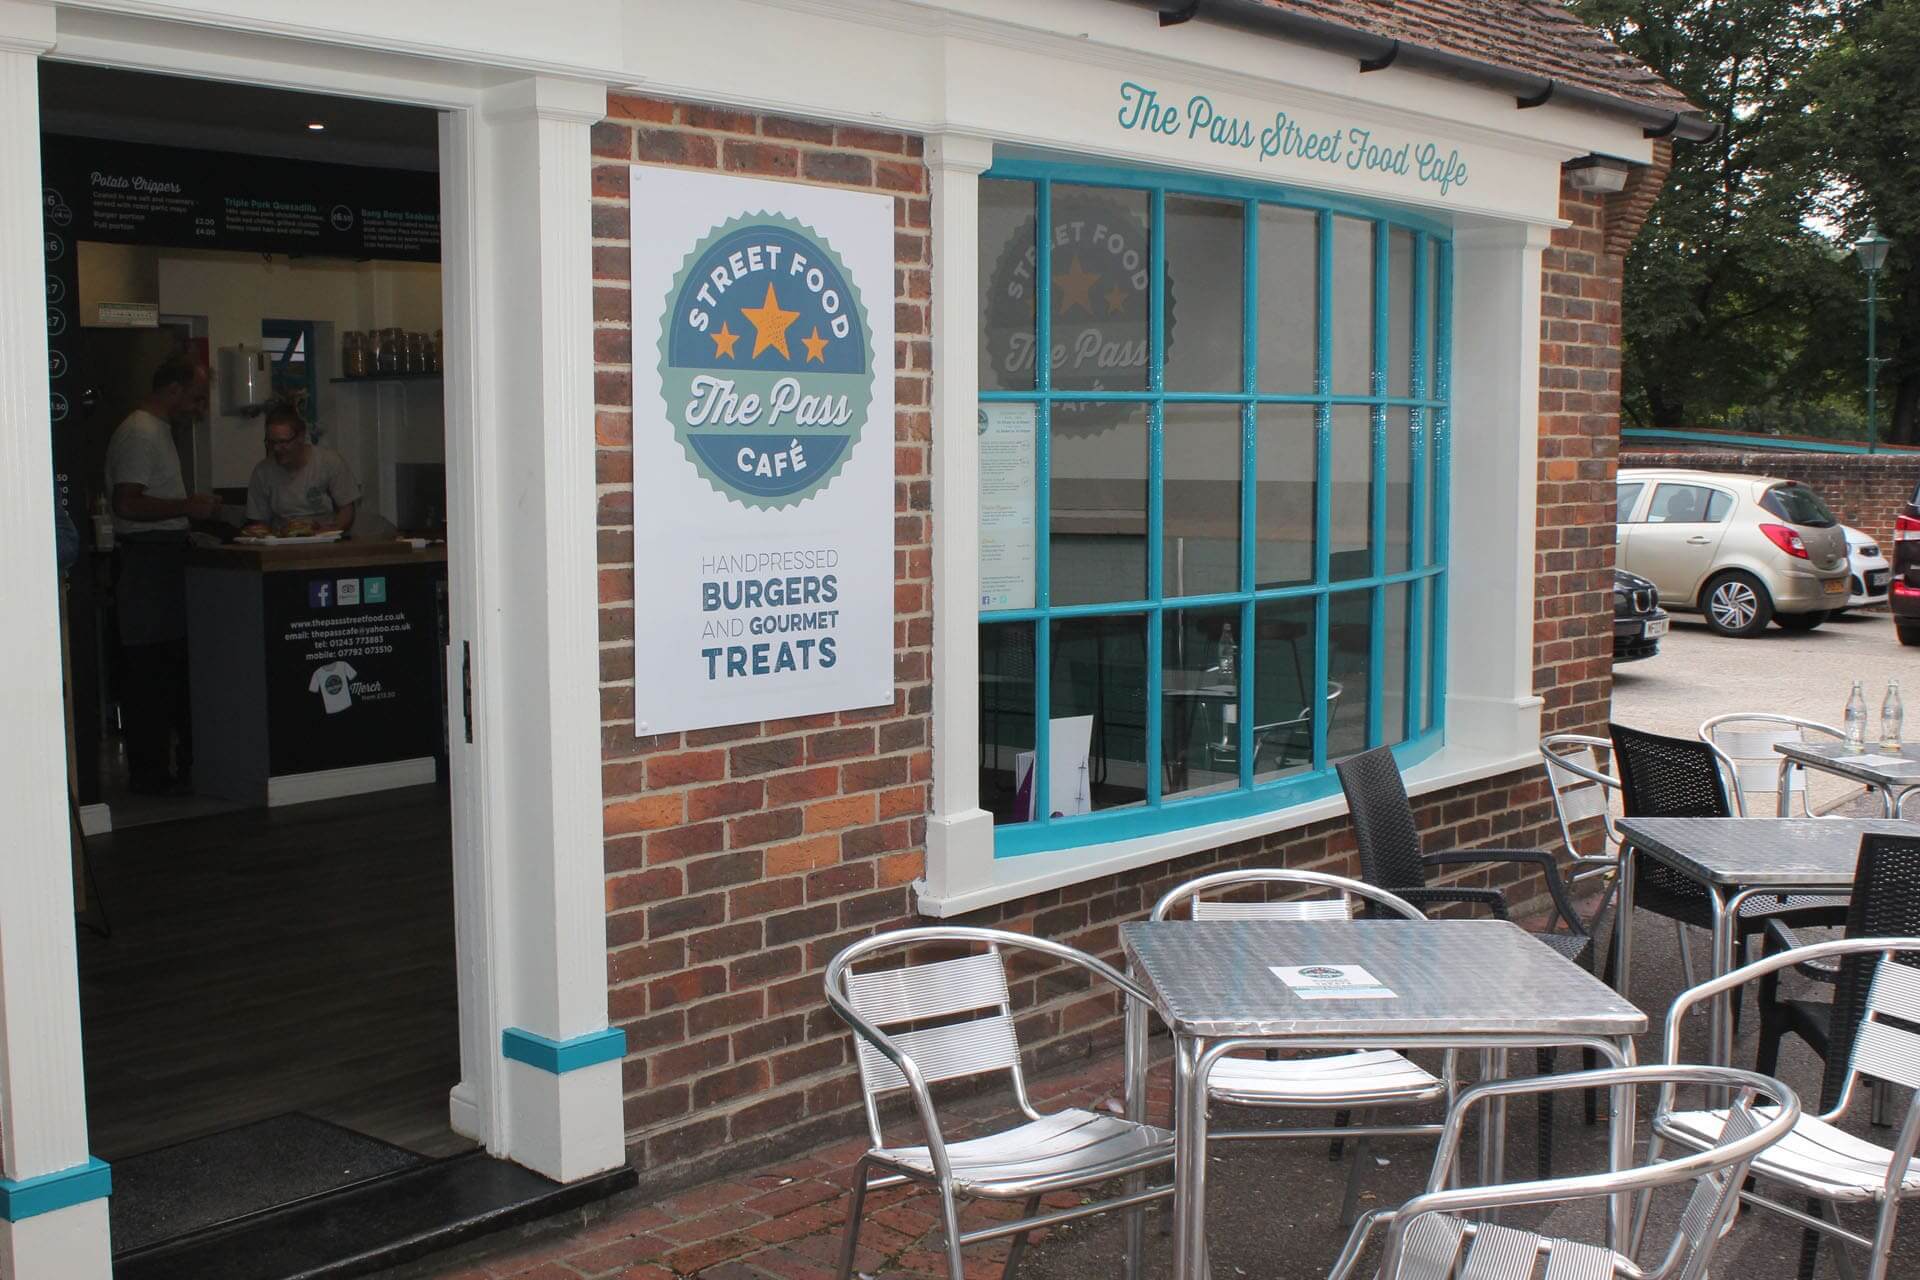 The Pass Street Food Cafe, Chichester